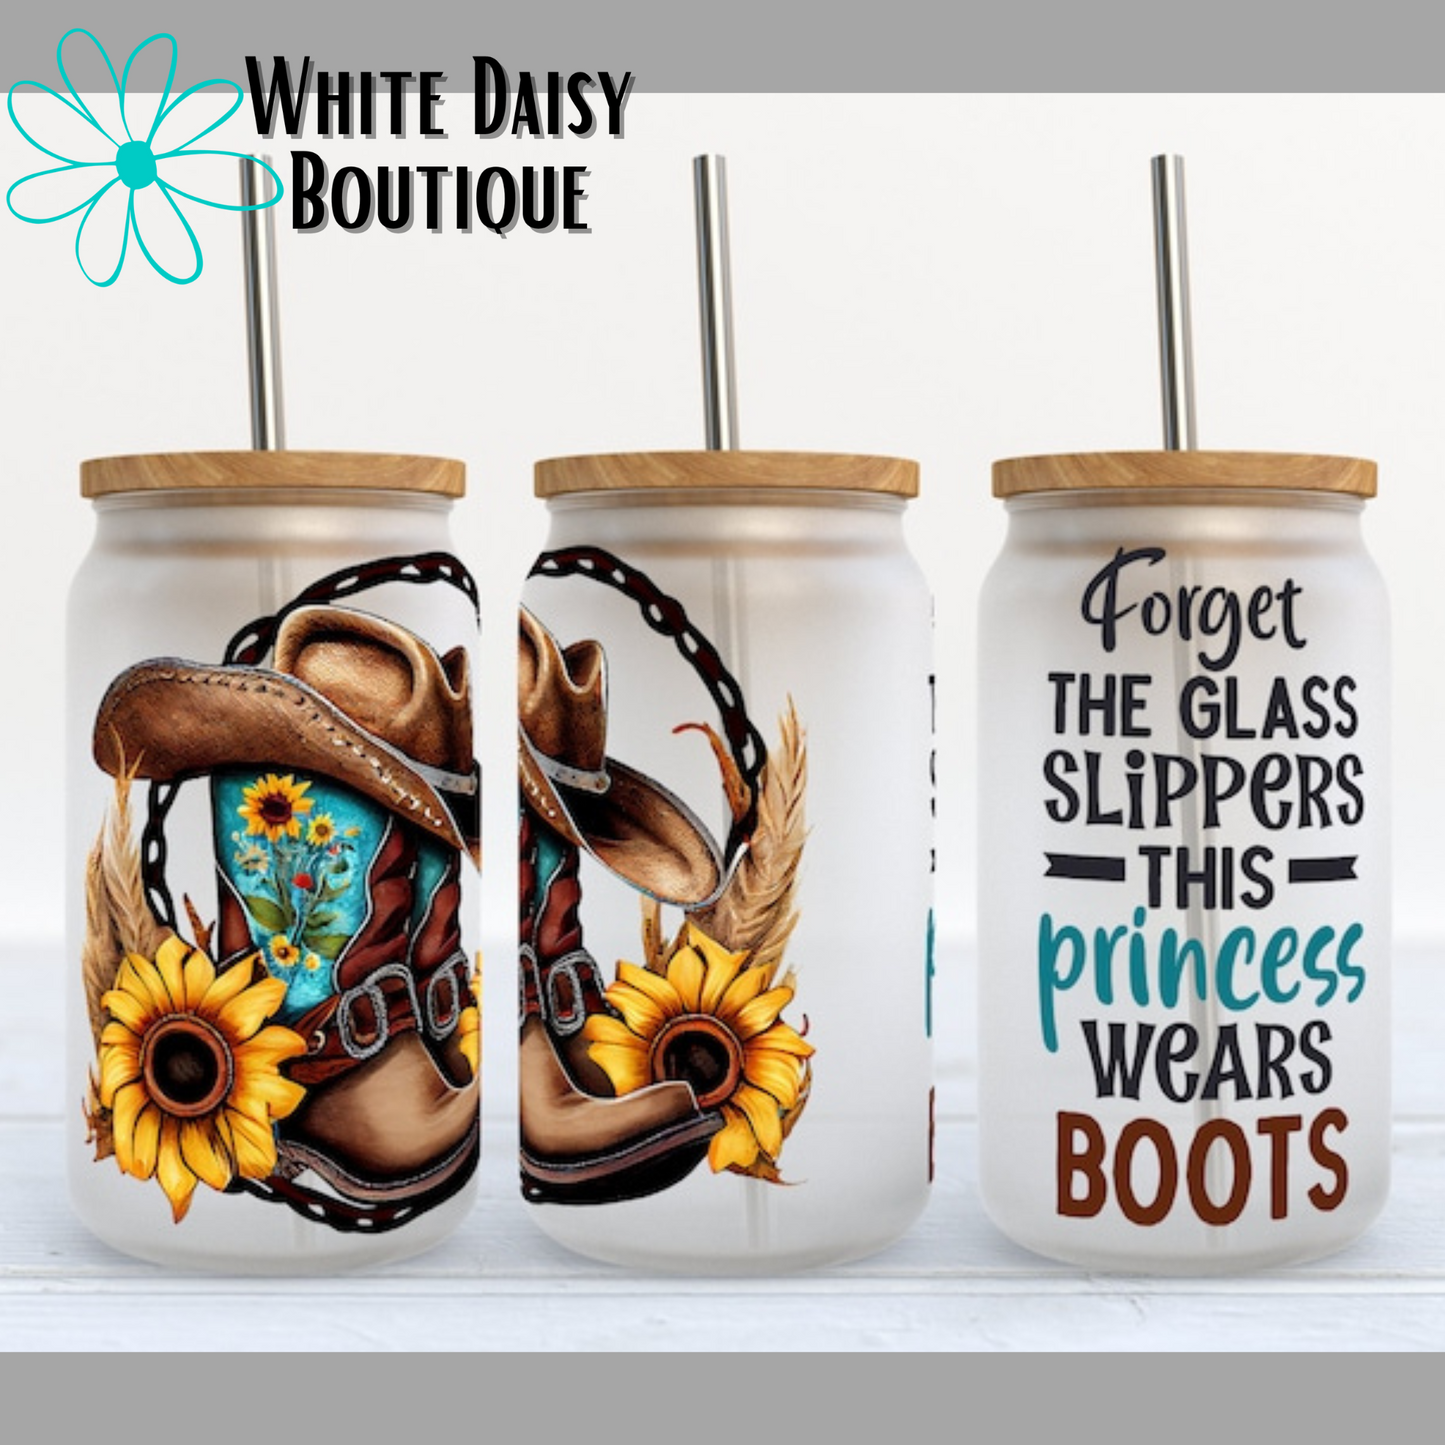 Forget The Glass Slippers, This Princess Wears Boots- 16 oz Libbey Glass